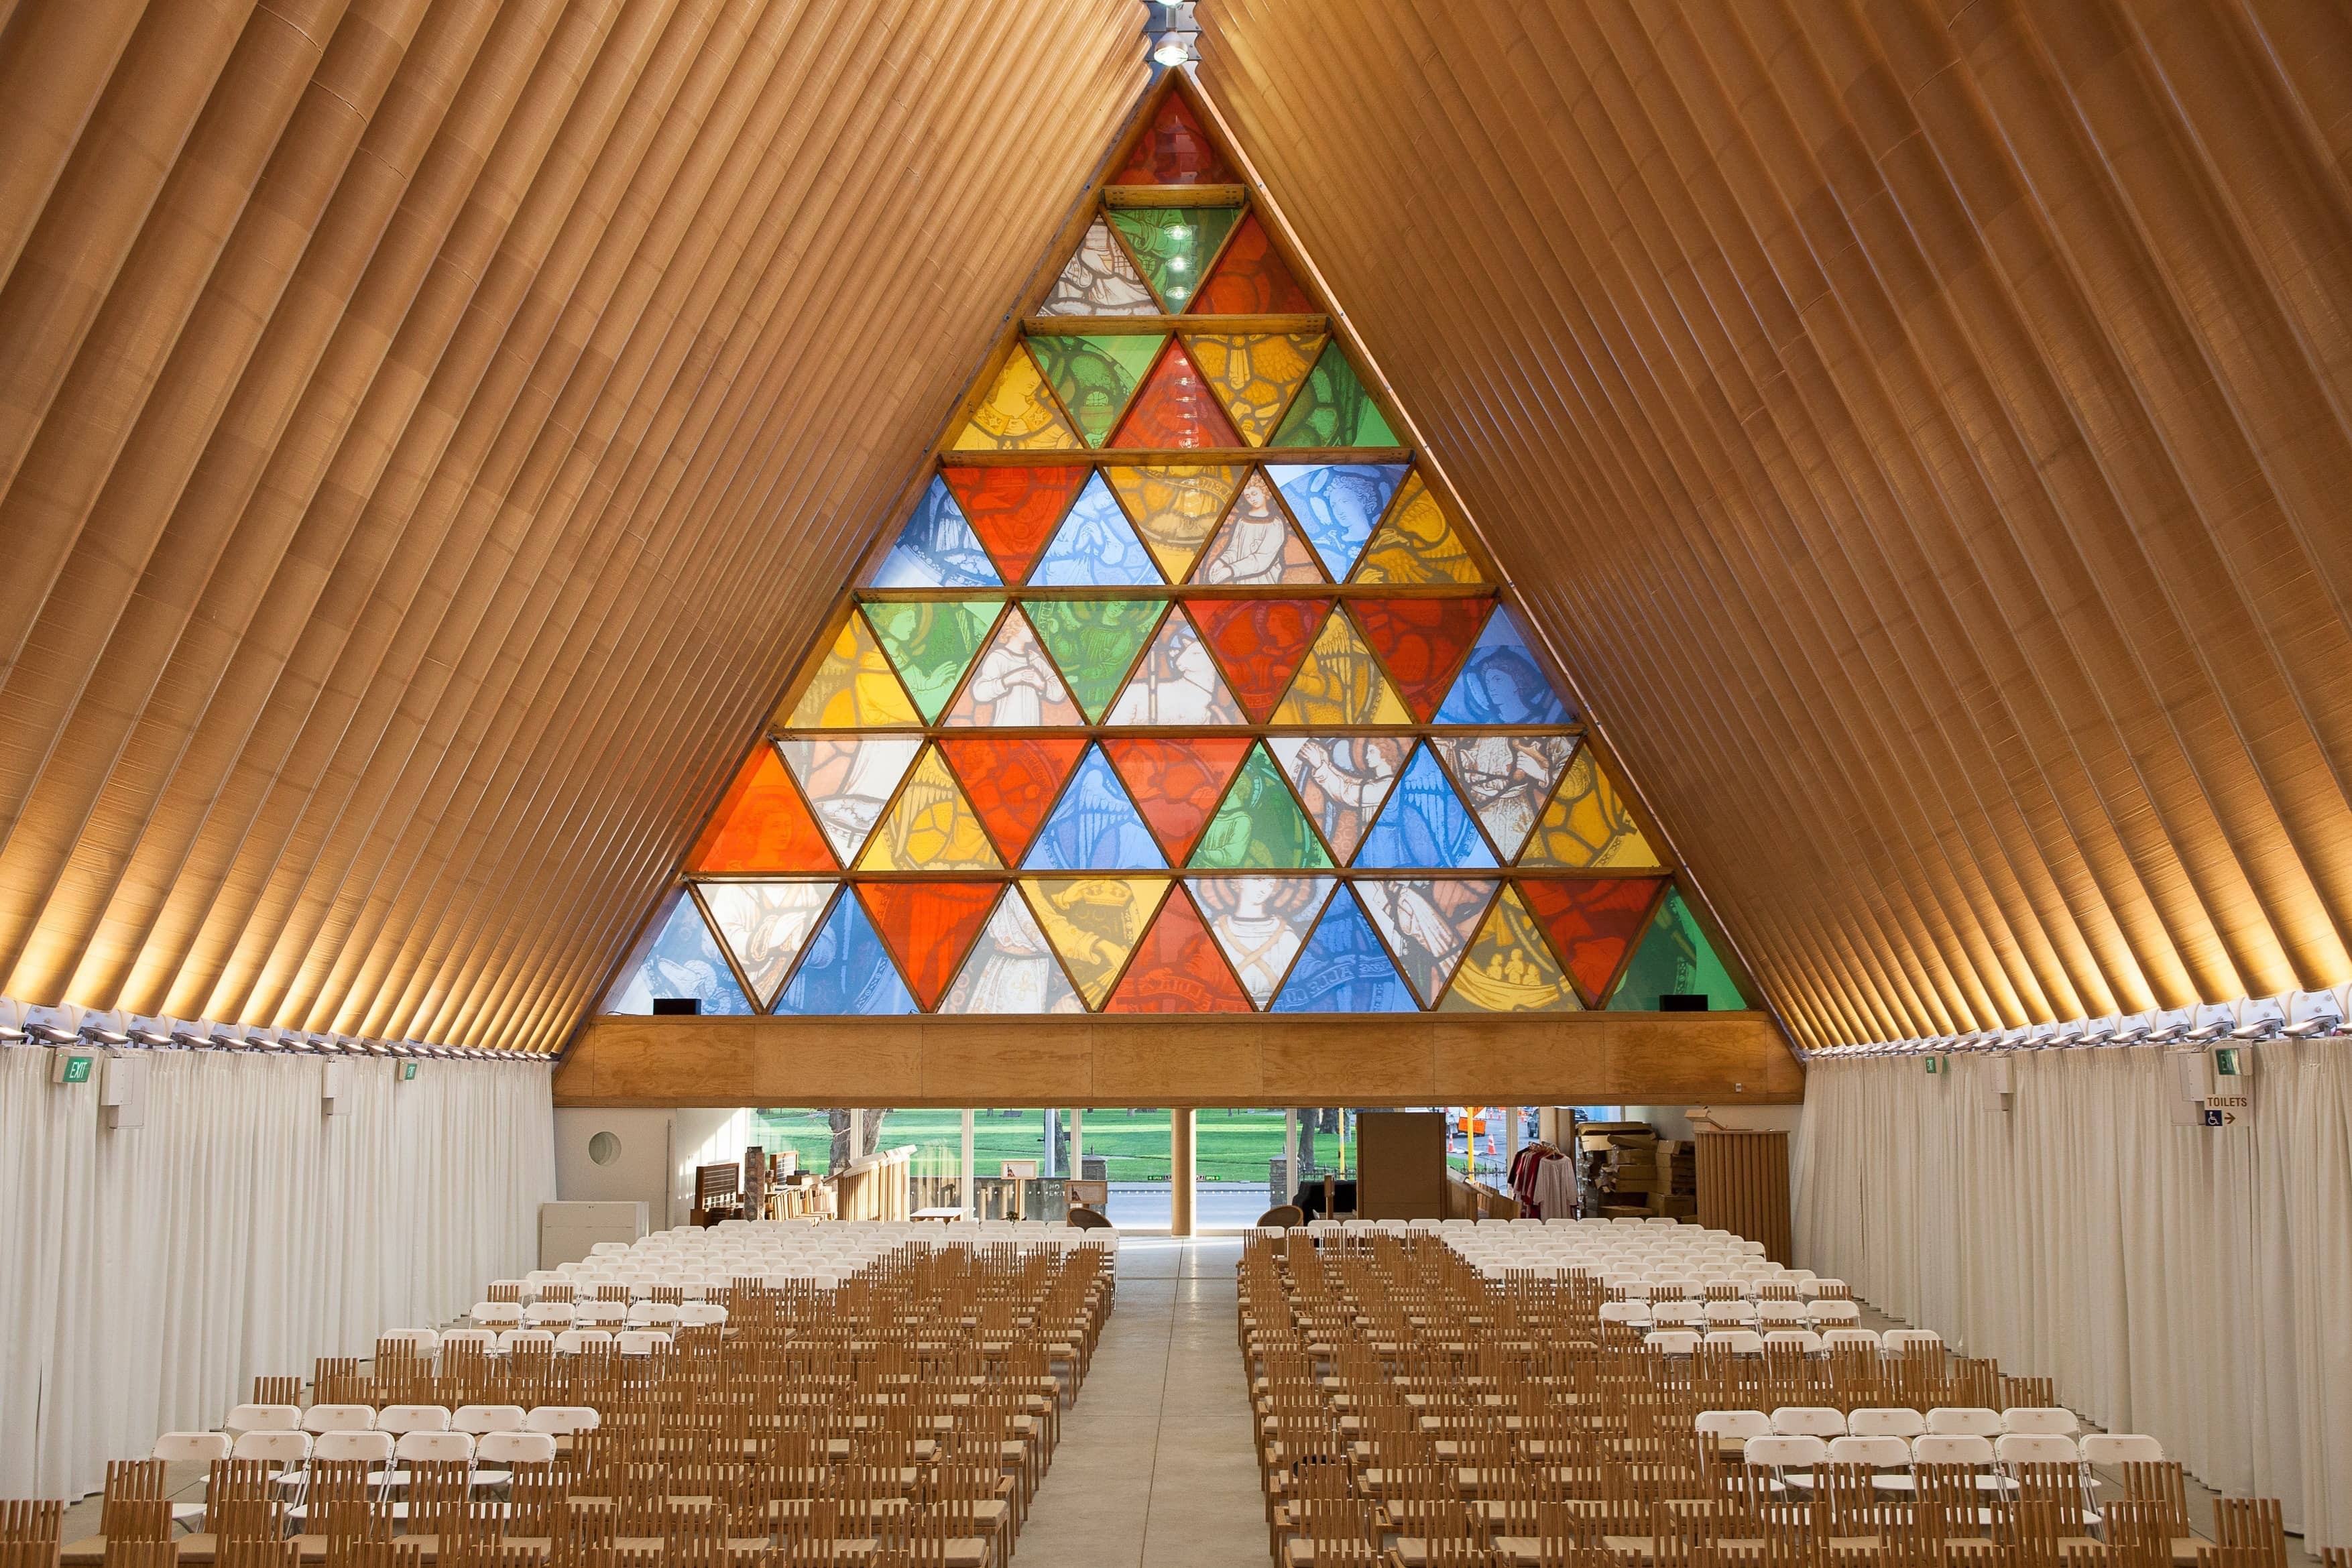 Christchurch Venue - Transitional/Cardboard Cathedral